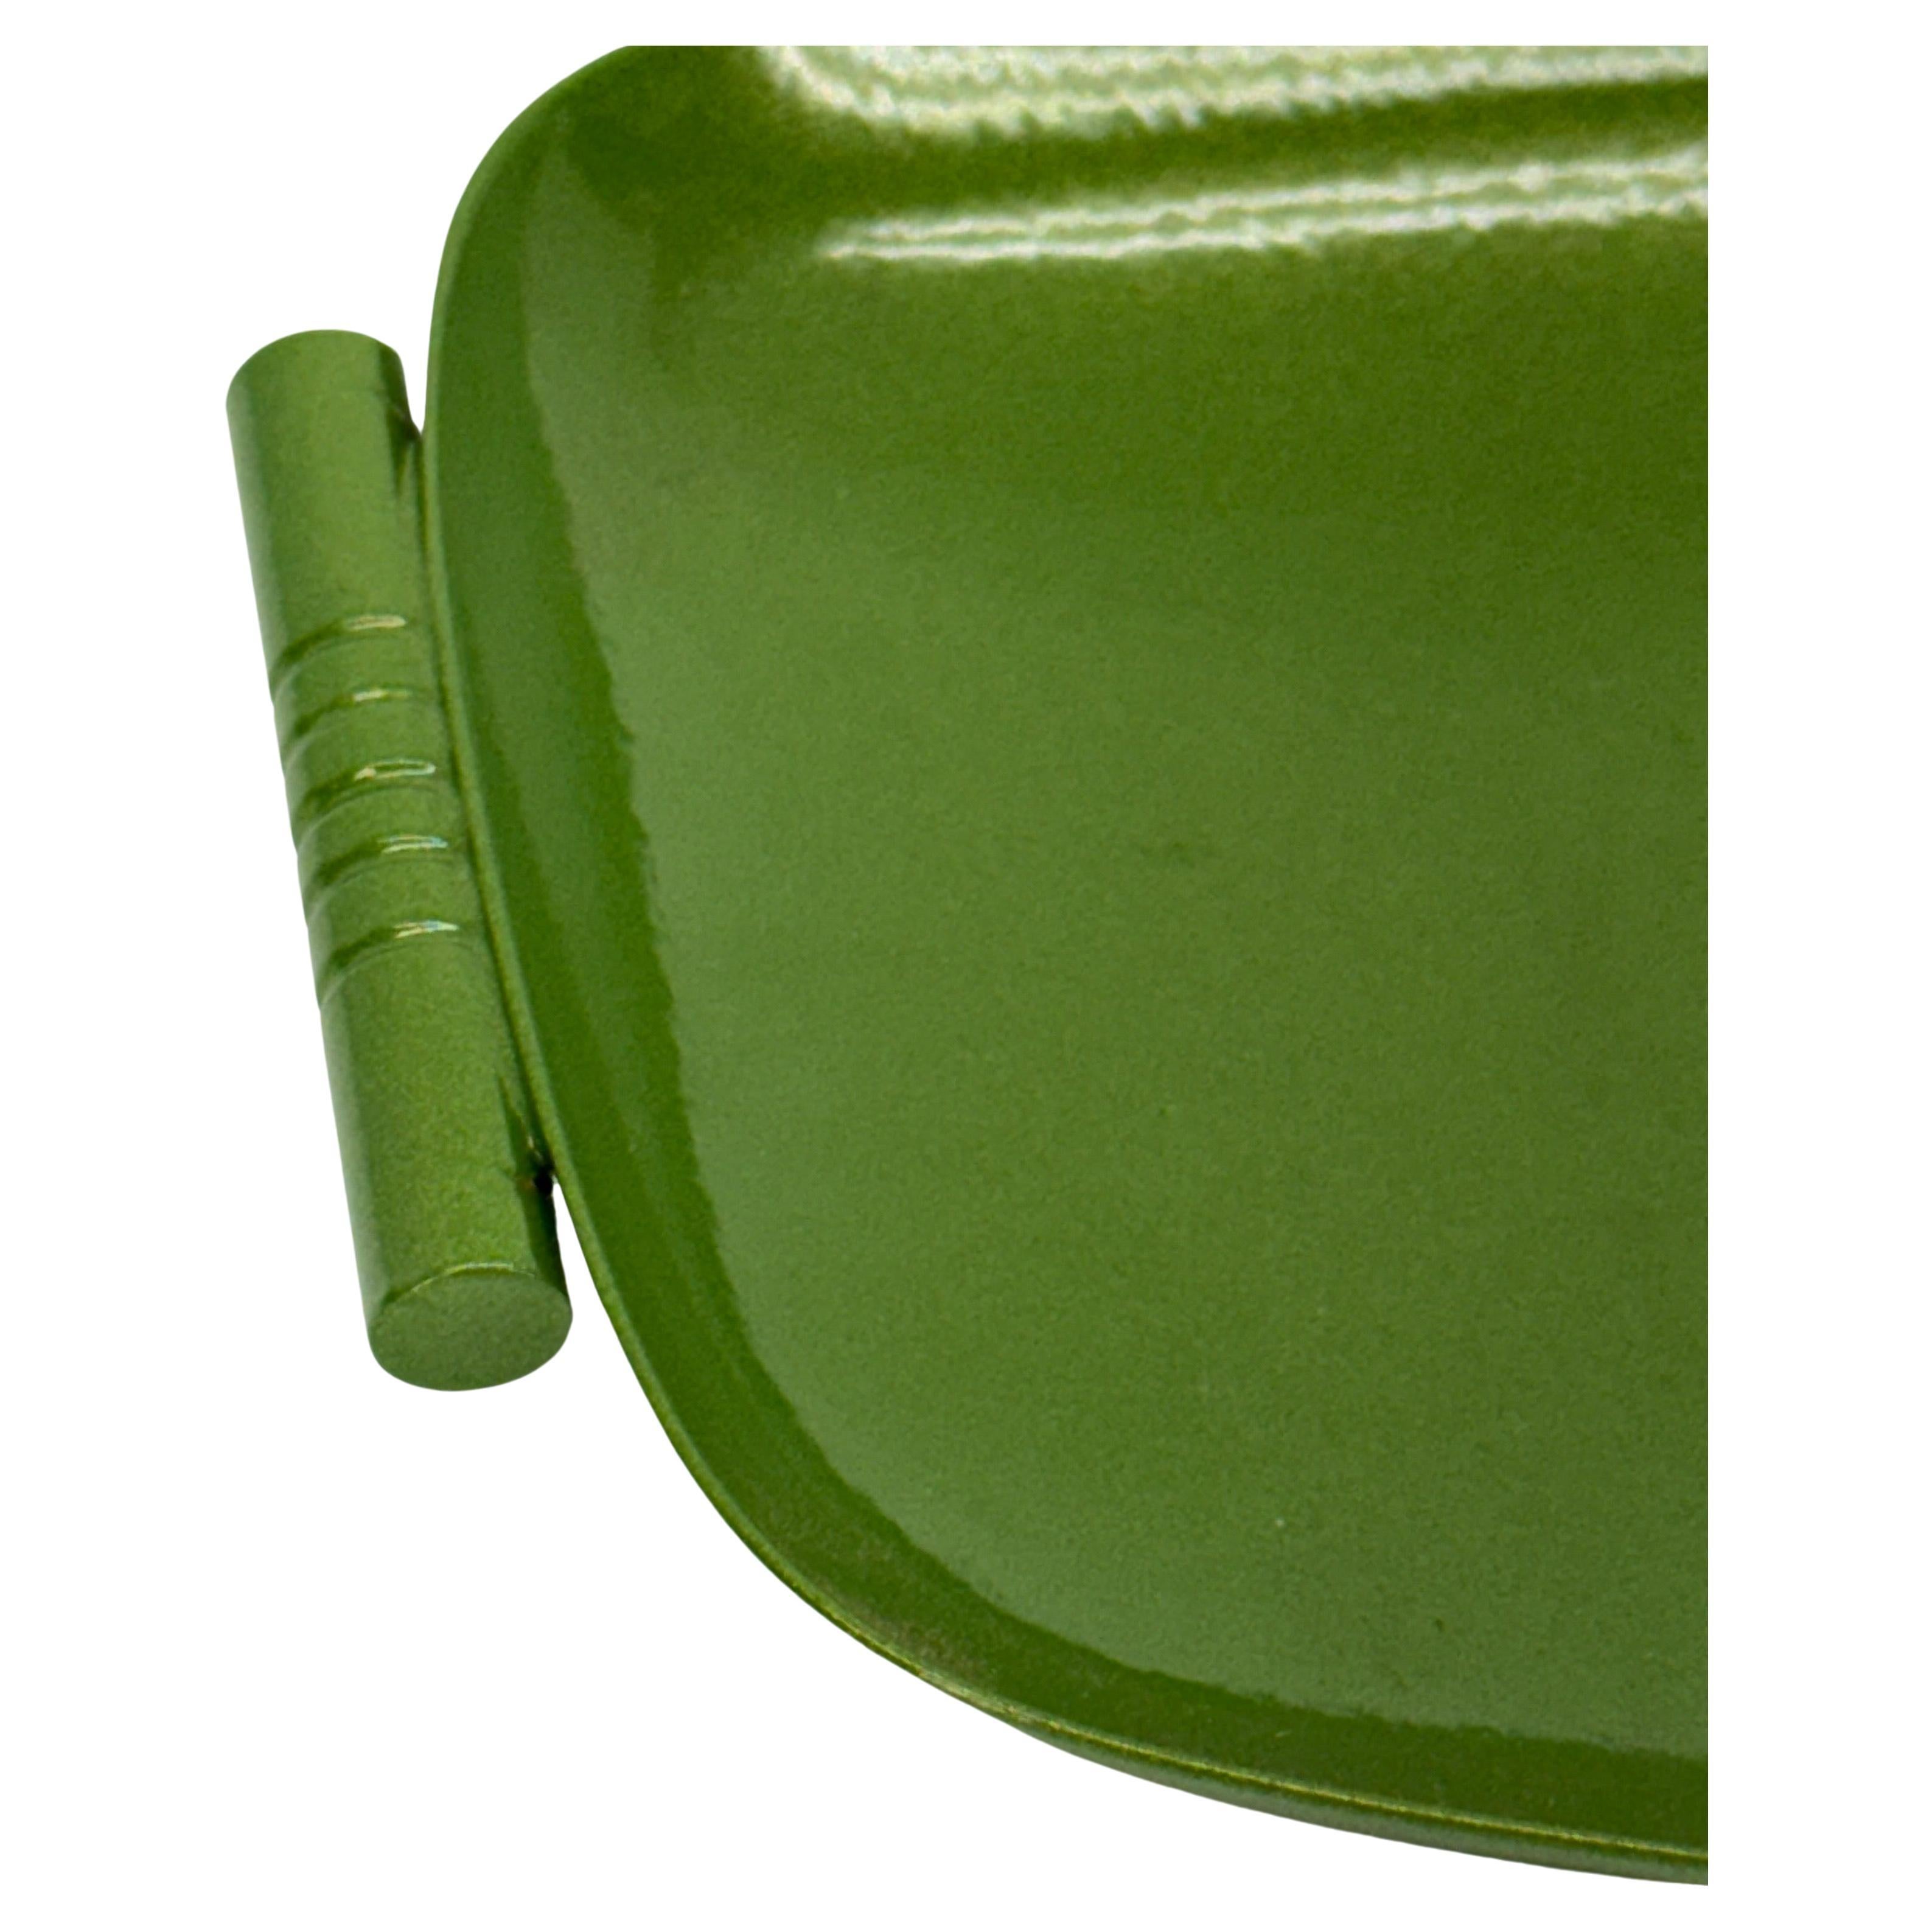 American Mid-Century Modern Powder-Coated Leafy Green Metal Tray or Dish For Sale